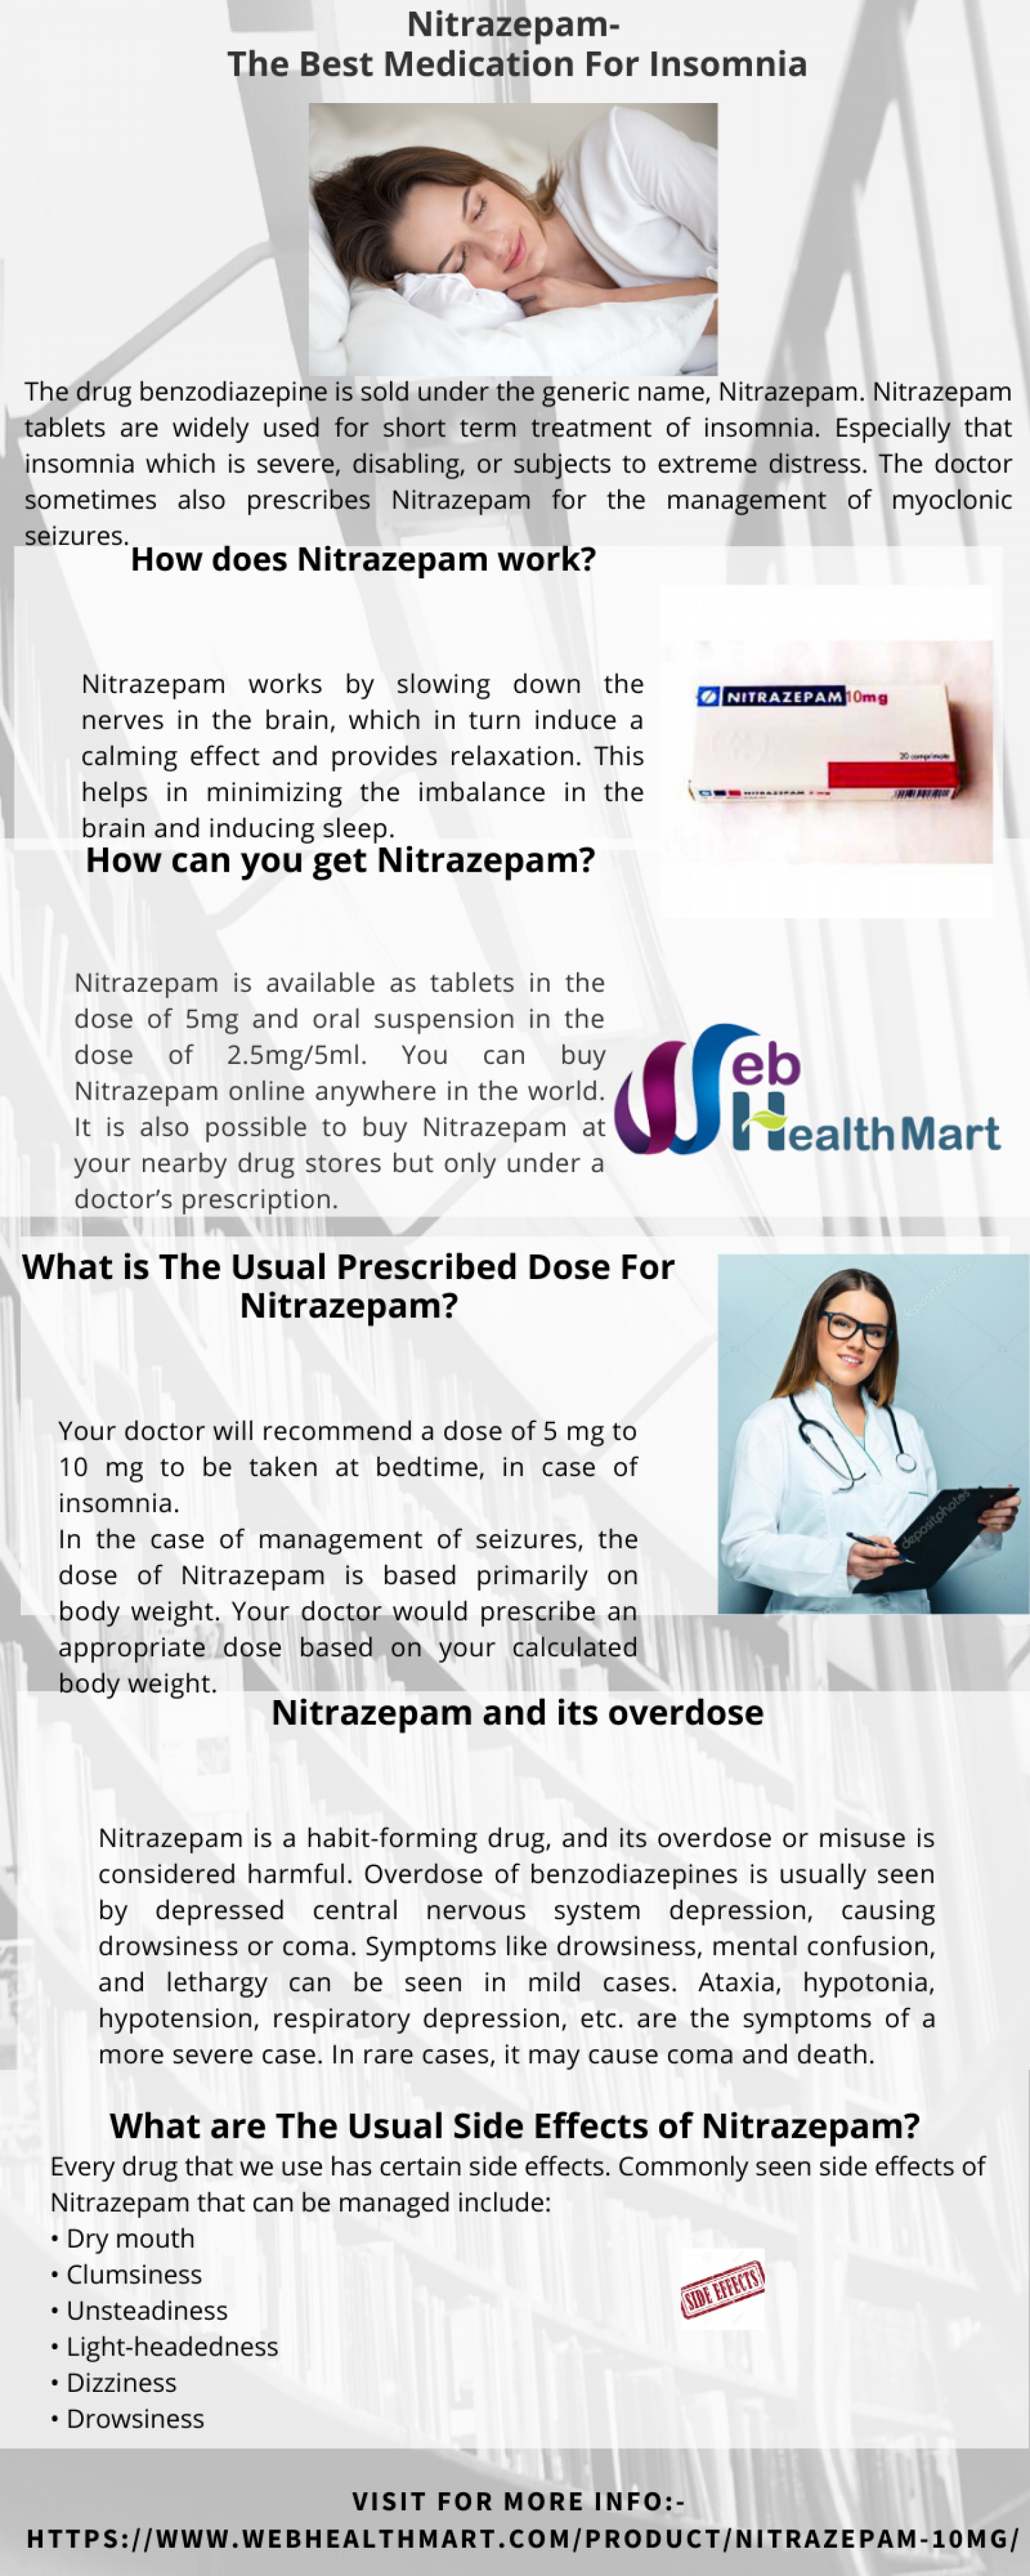 Nitrazepam- The Best Medication For Insomnia Infographic